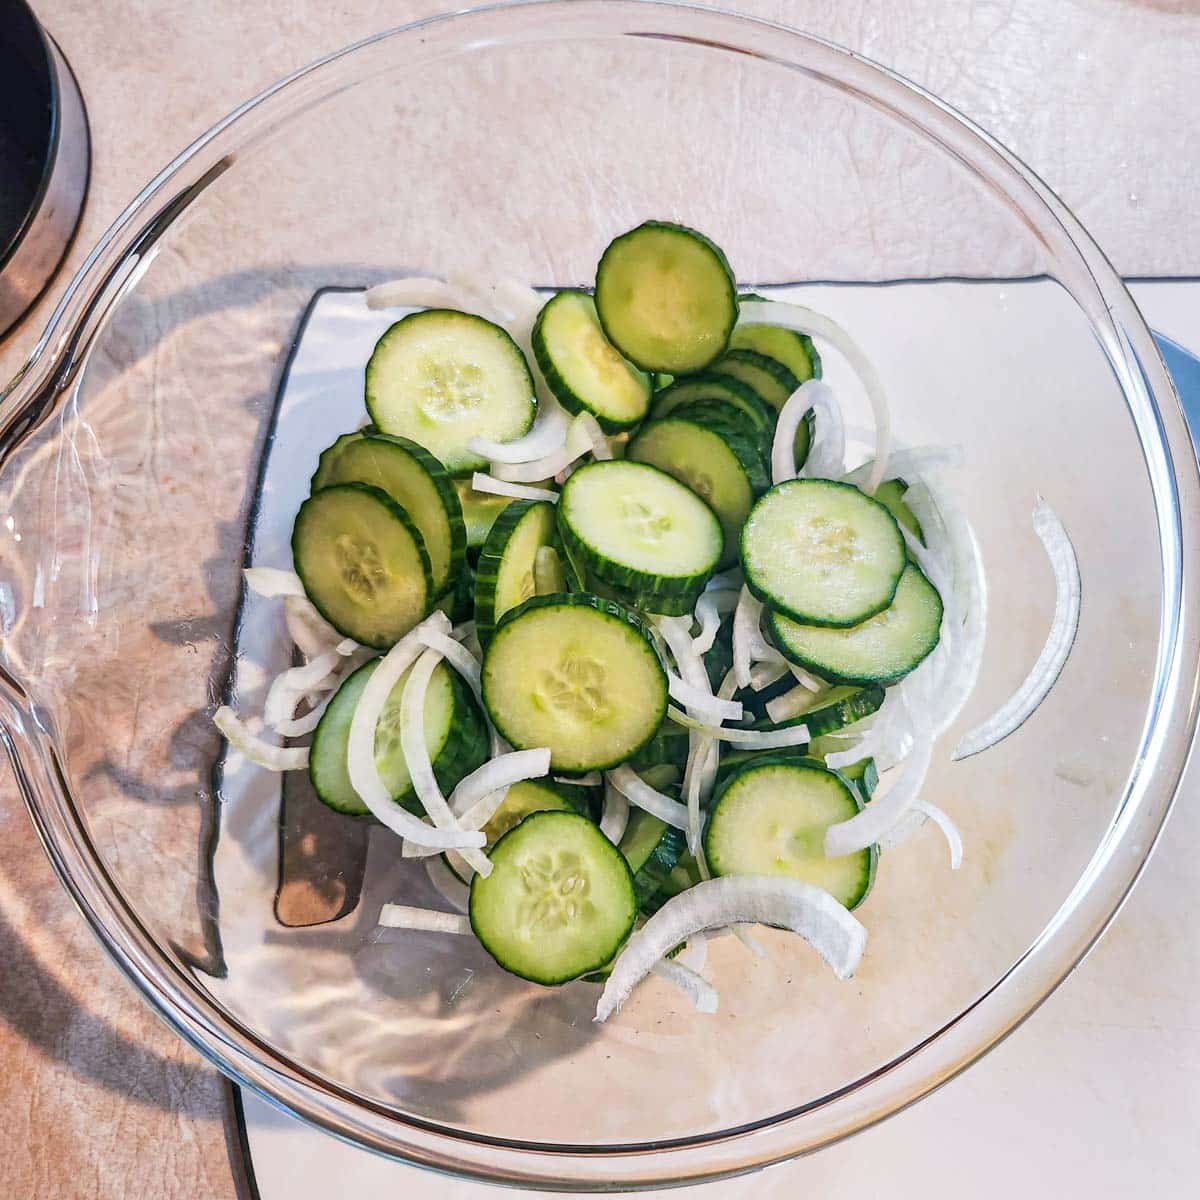 sliced cucumbers and sliced onions in a bowl